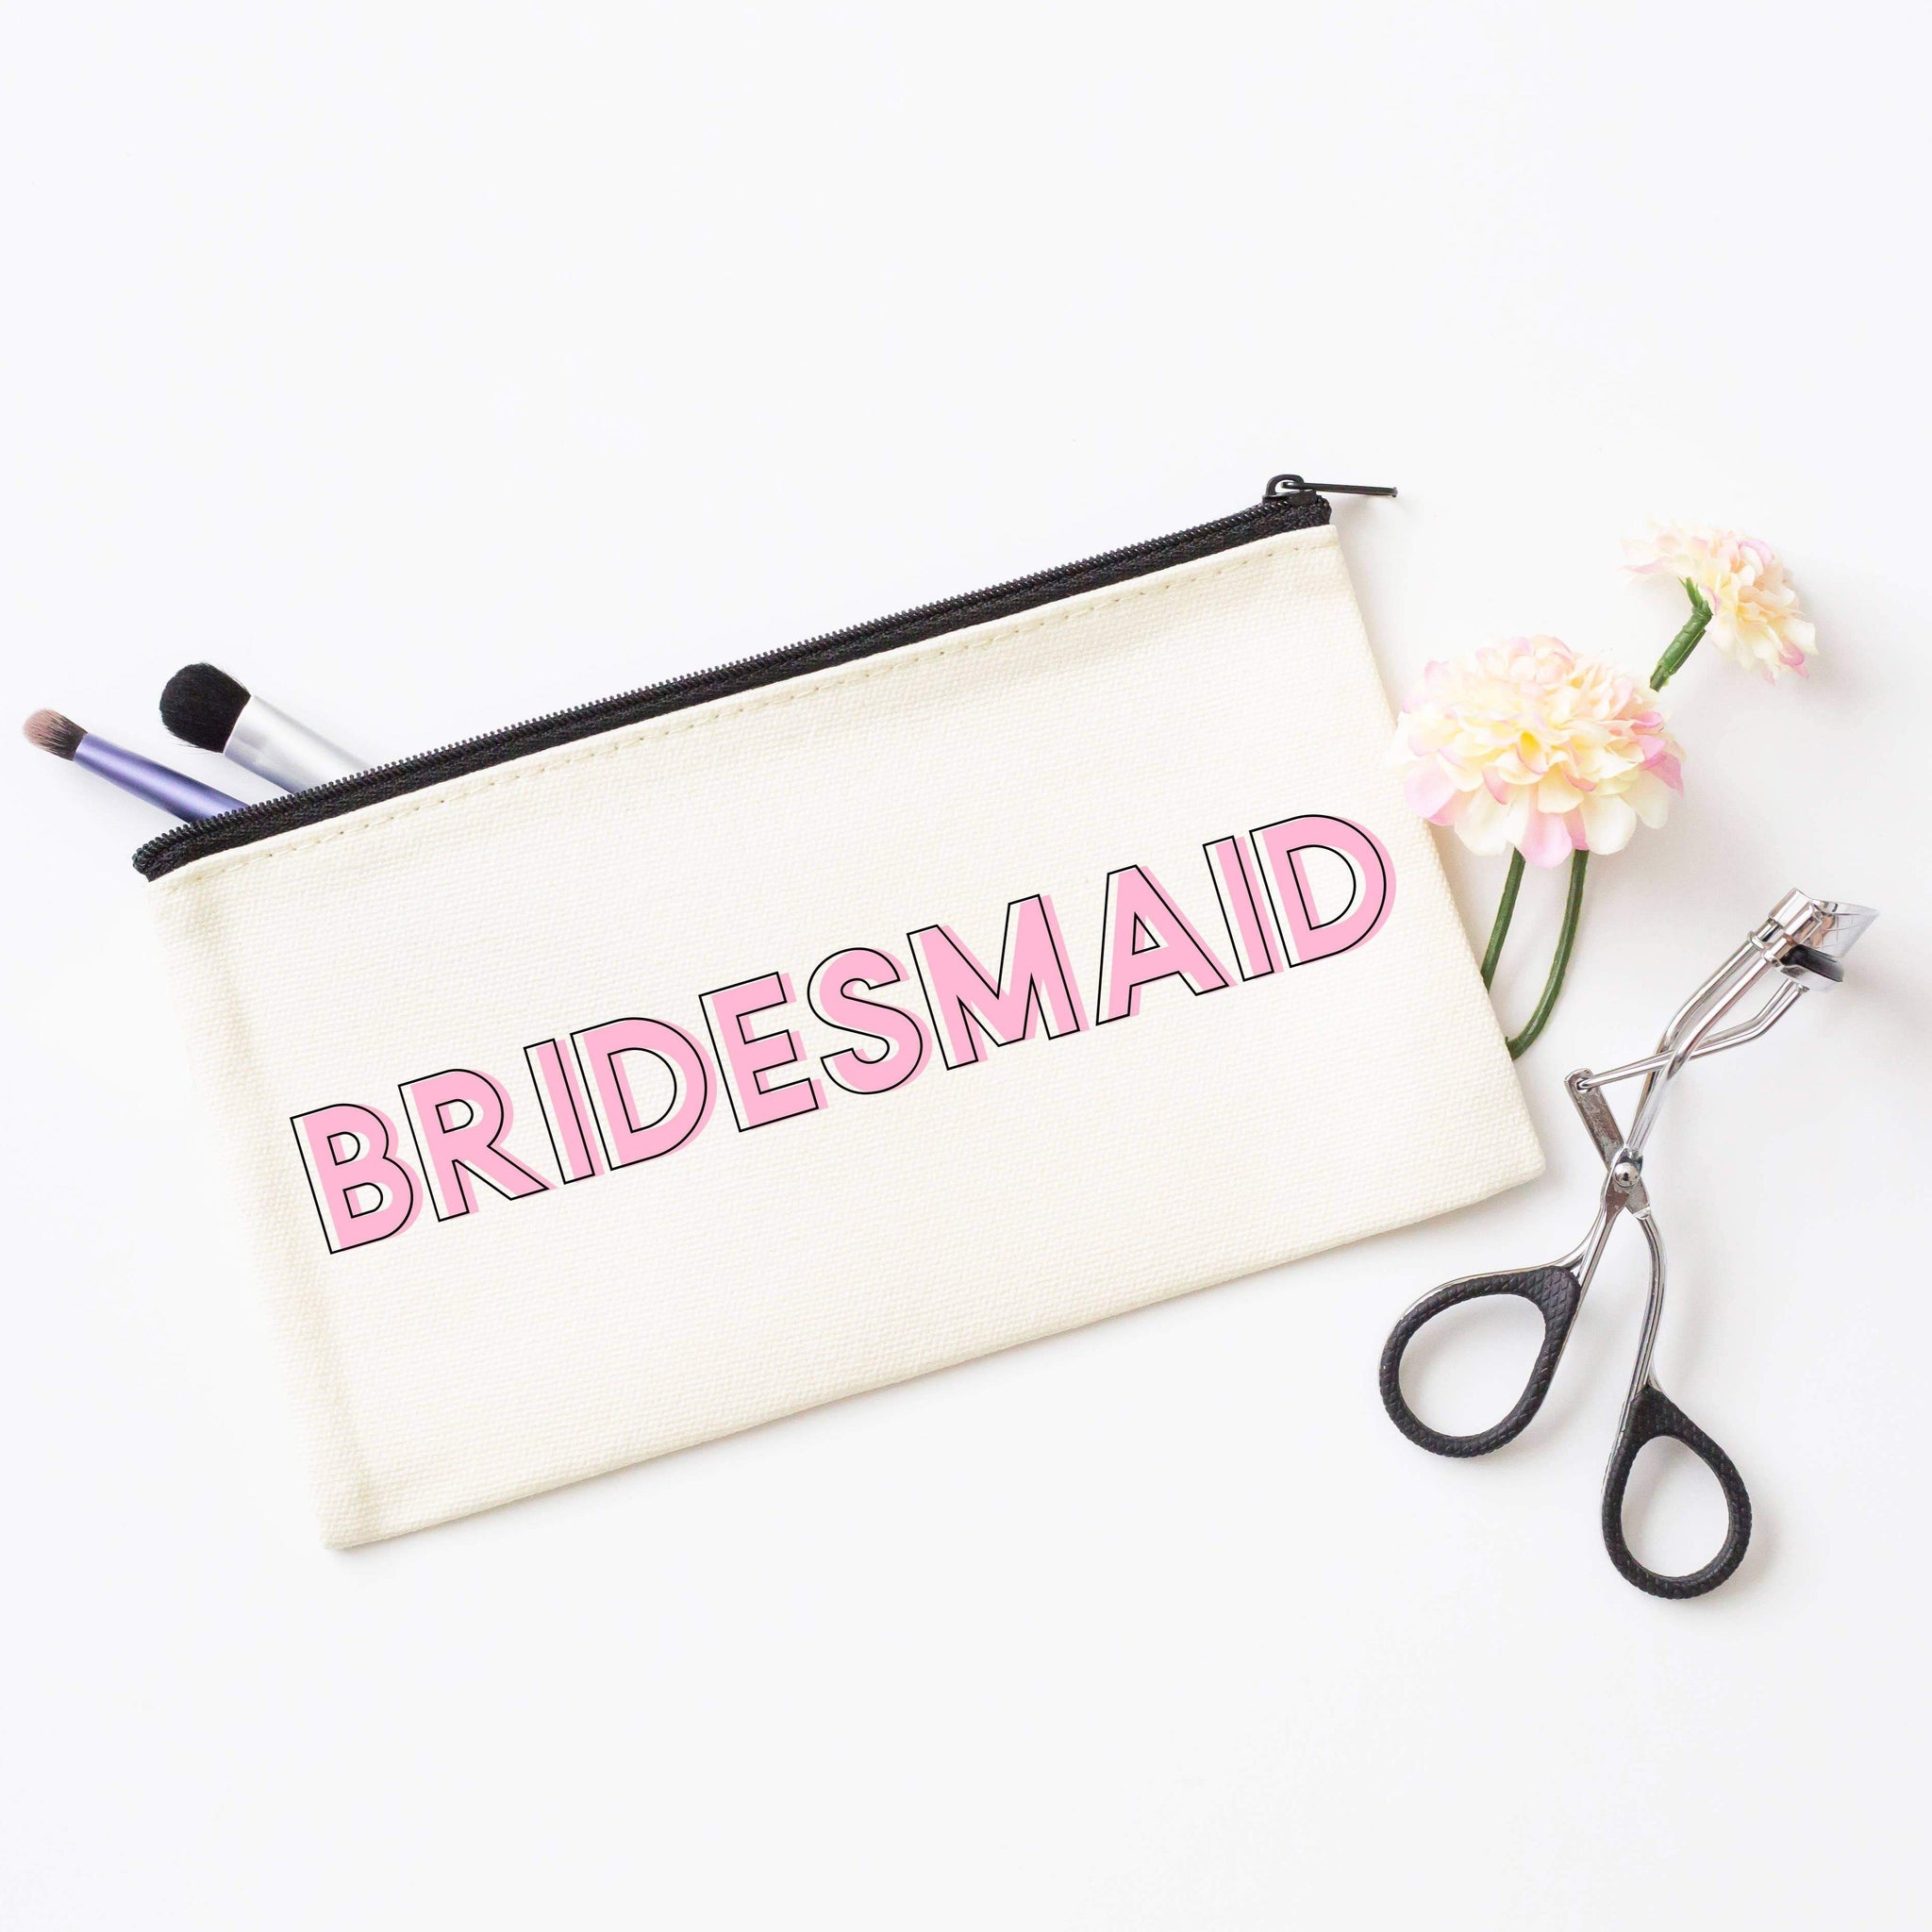 Bridesmaid Cosmetic Bag by Birdy Grey, front view